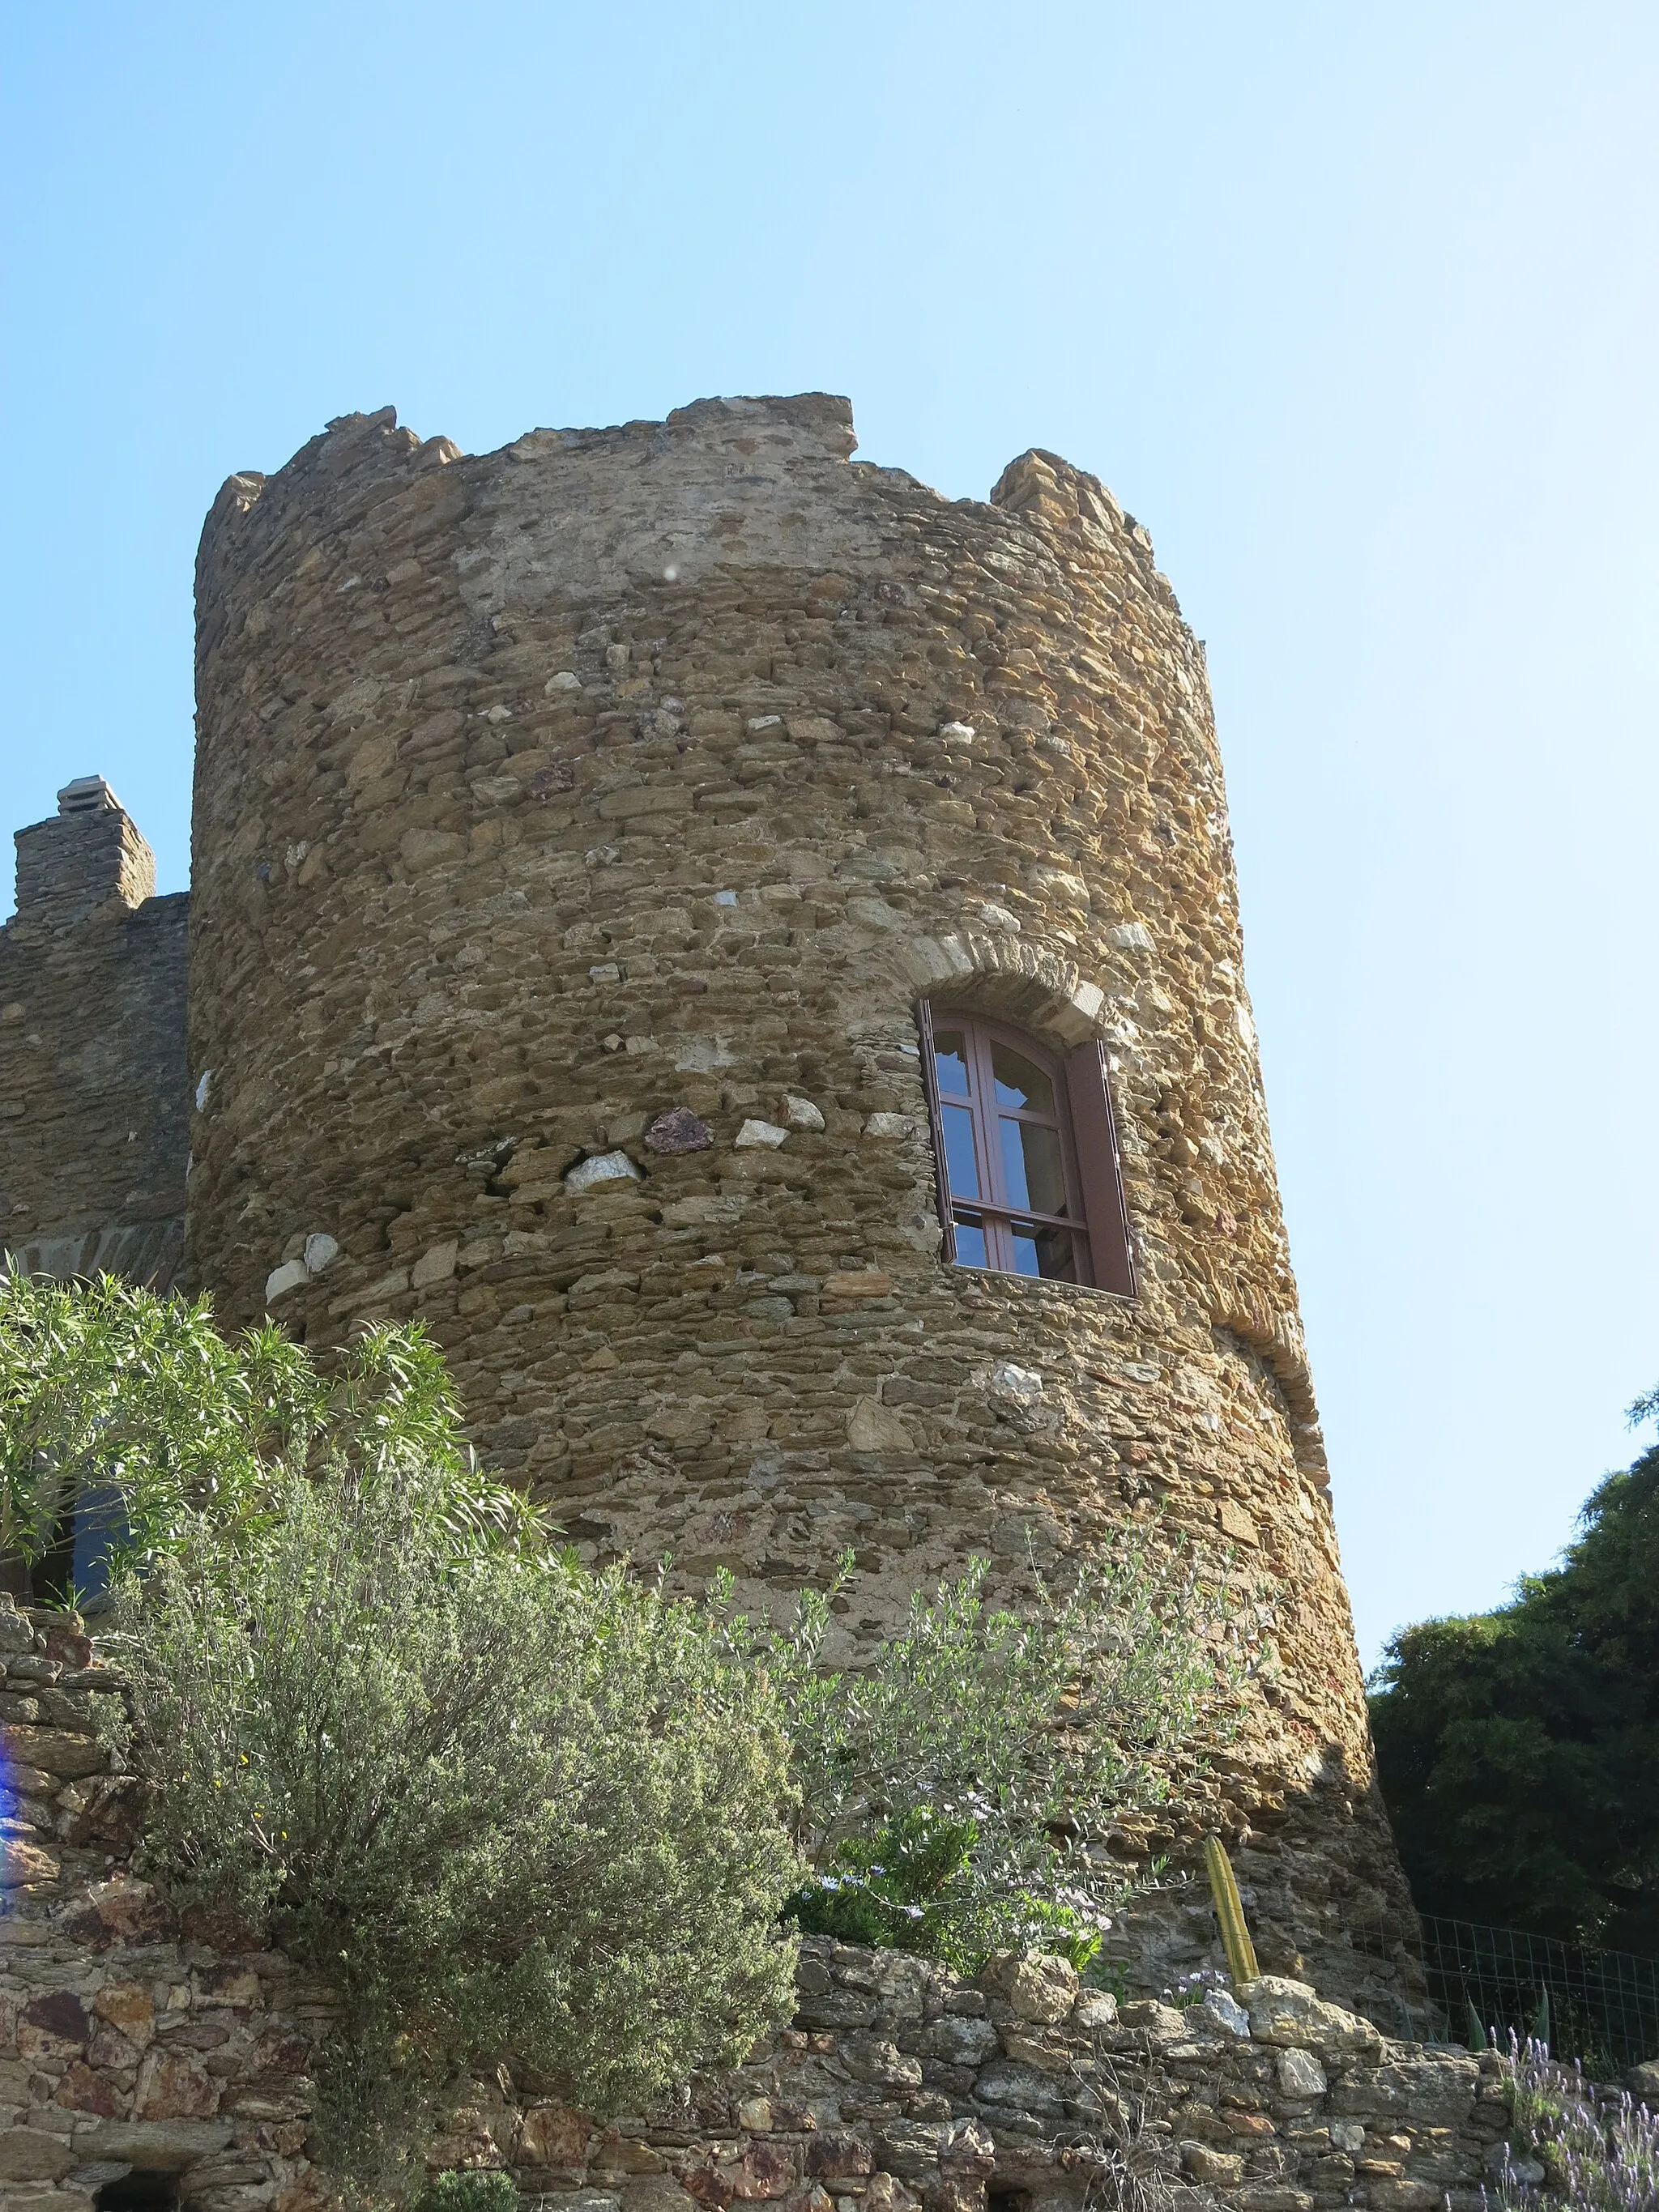 Photo showing: Tower of the castle of knights of Fos in Bormes-les-Mimosas (Var, France).